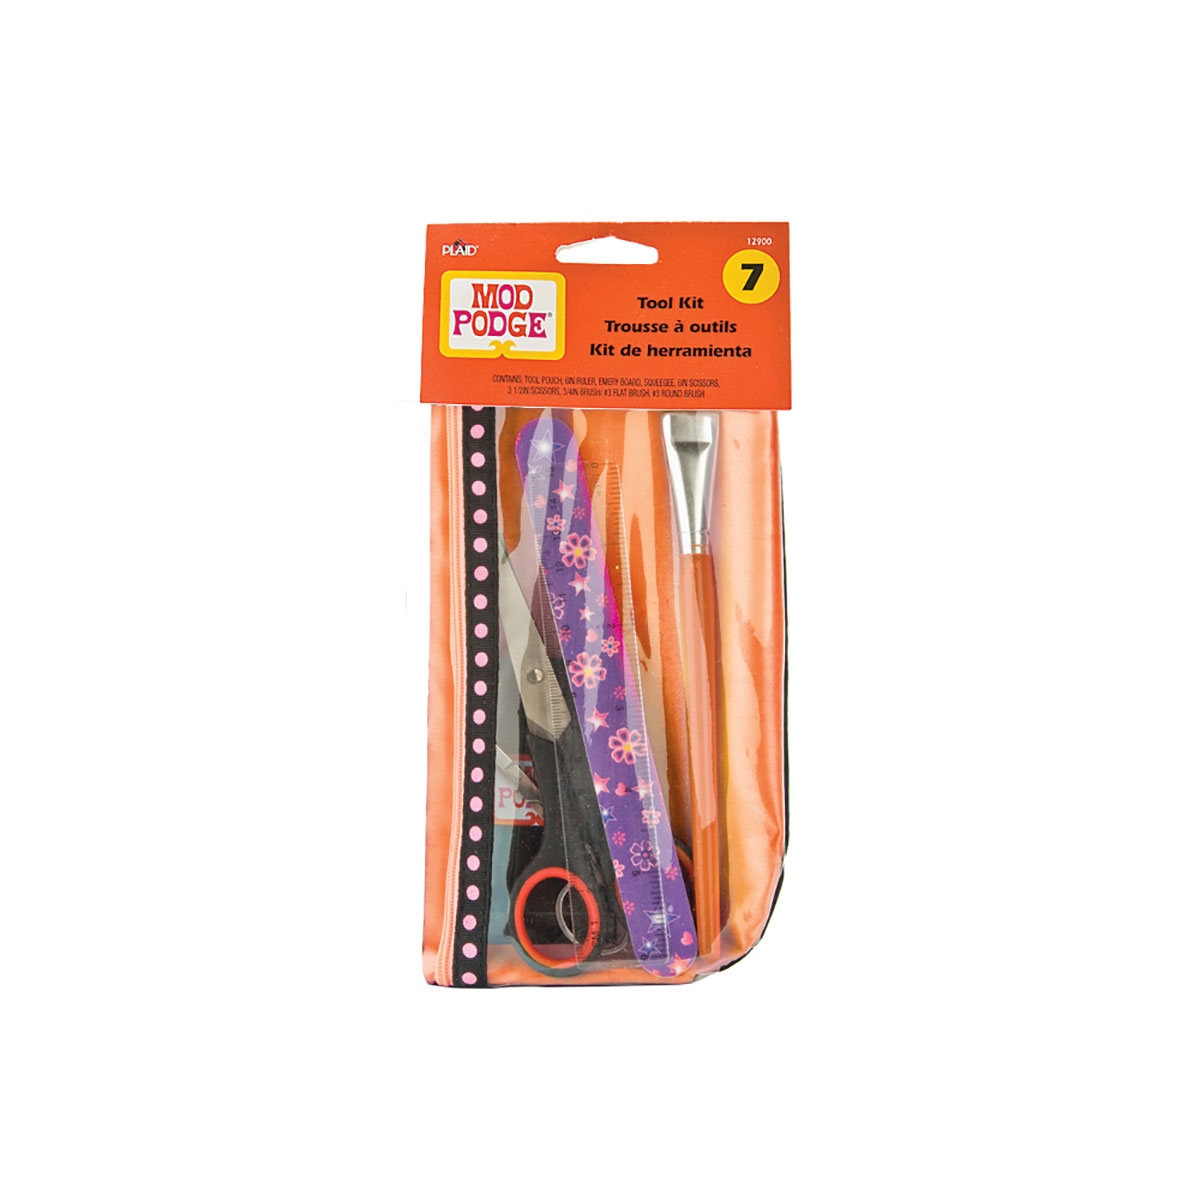 Trousse squeechie one piece